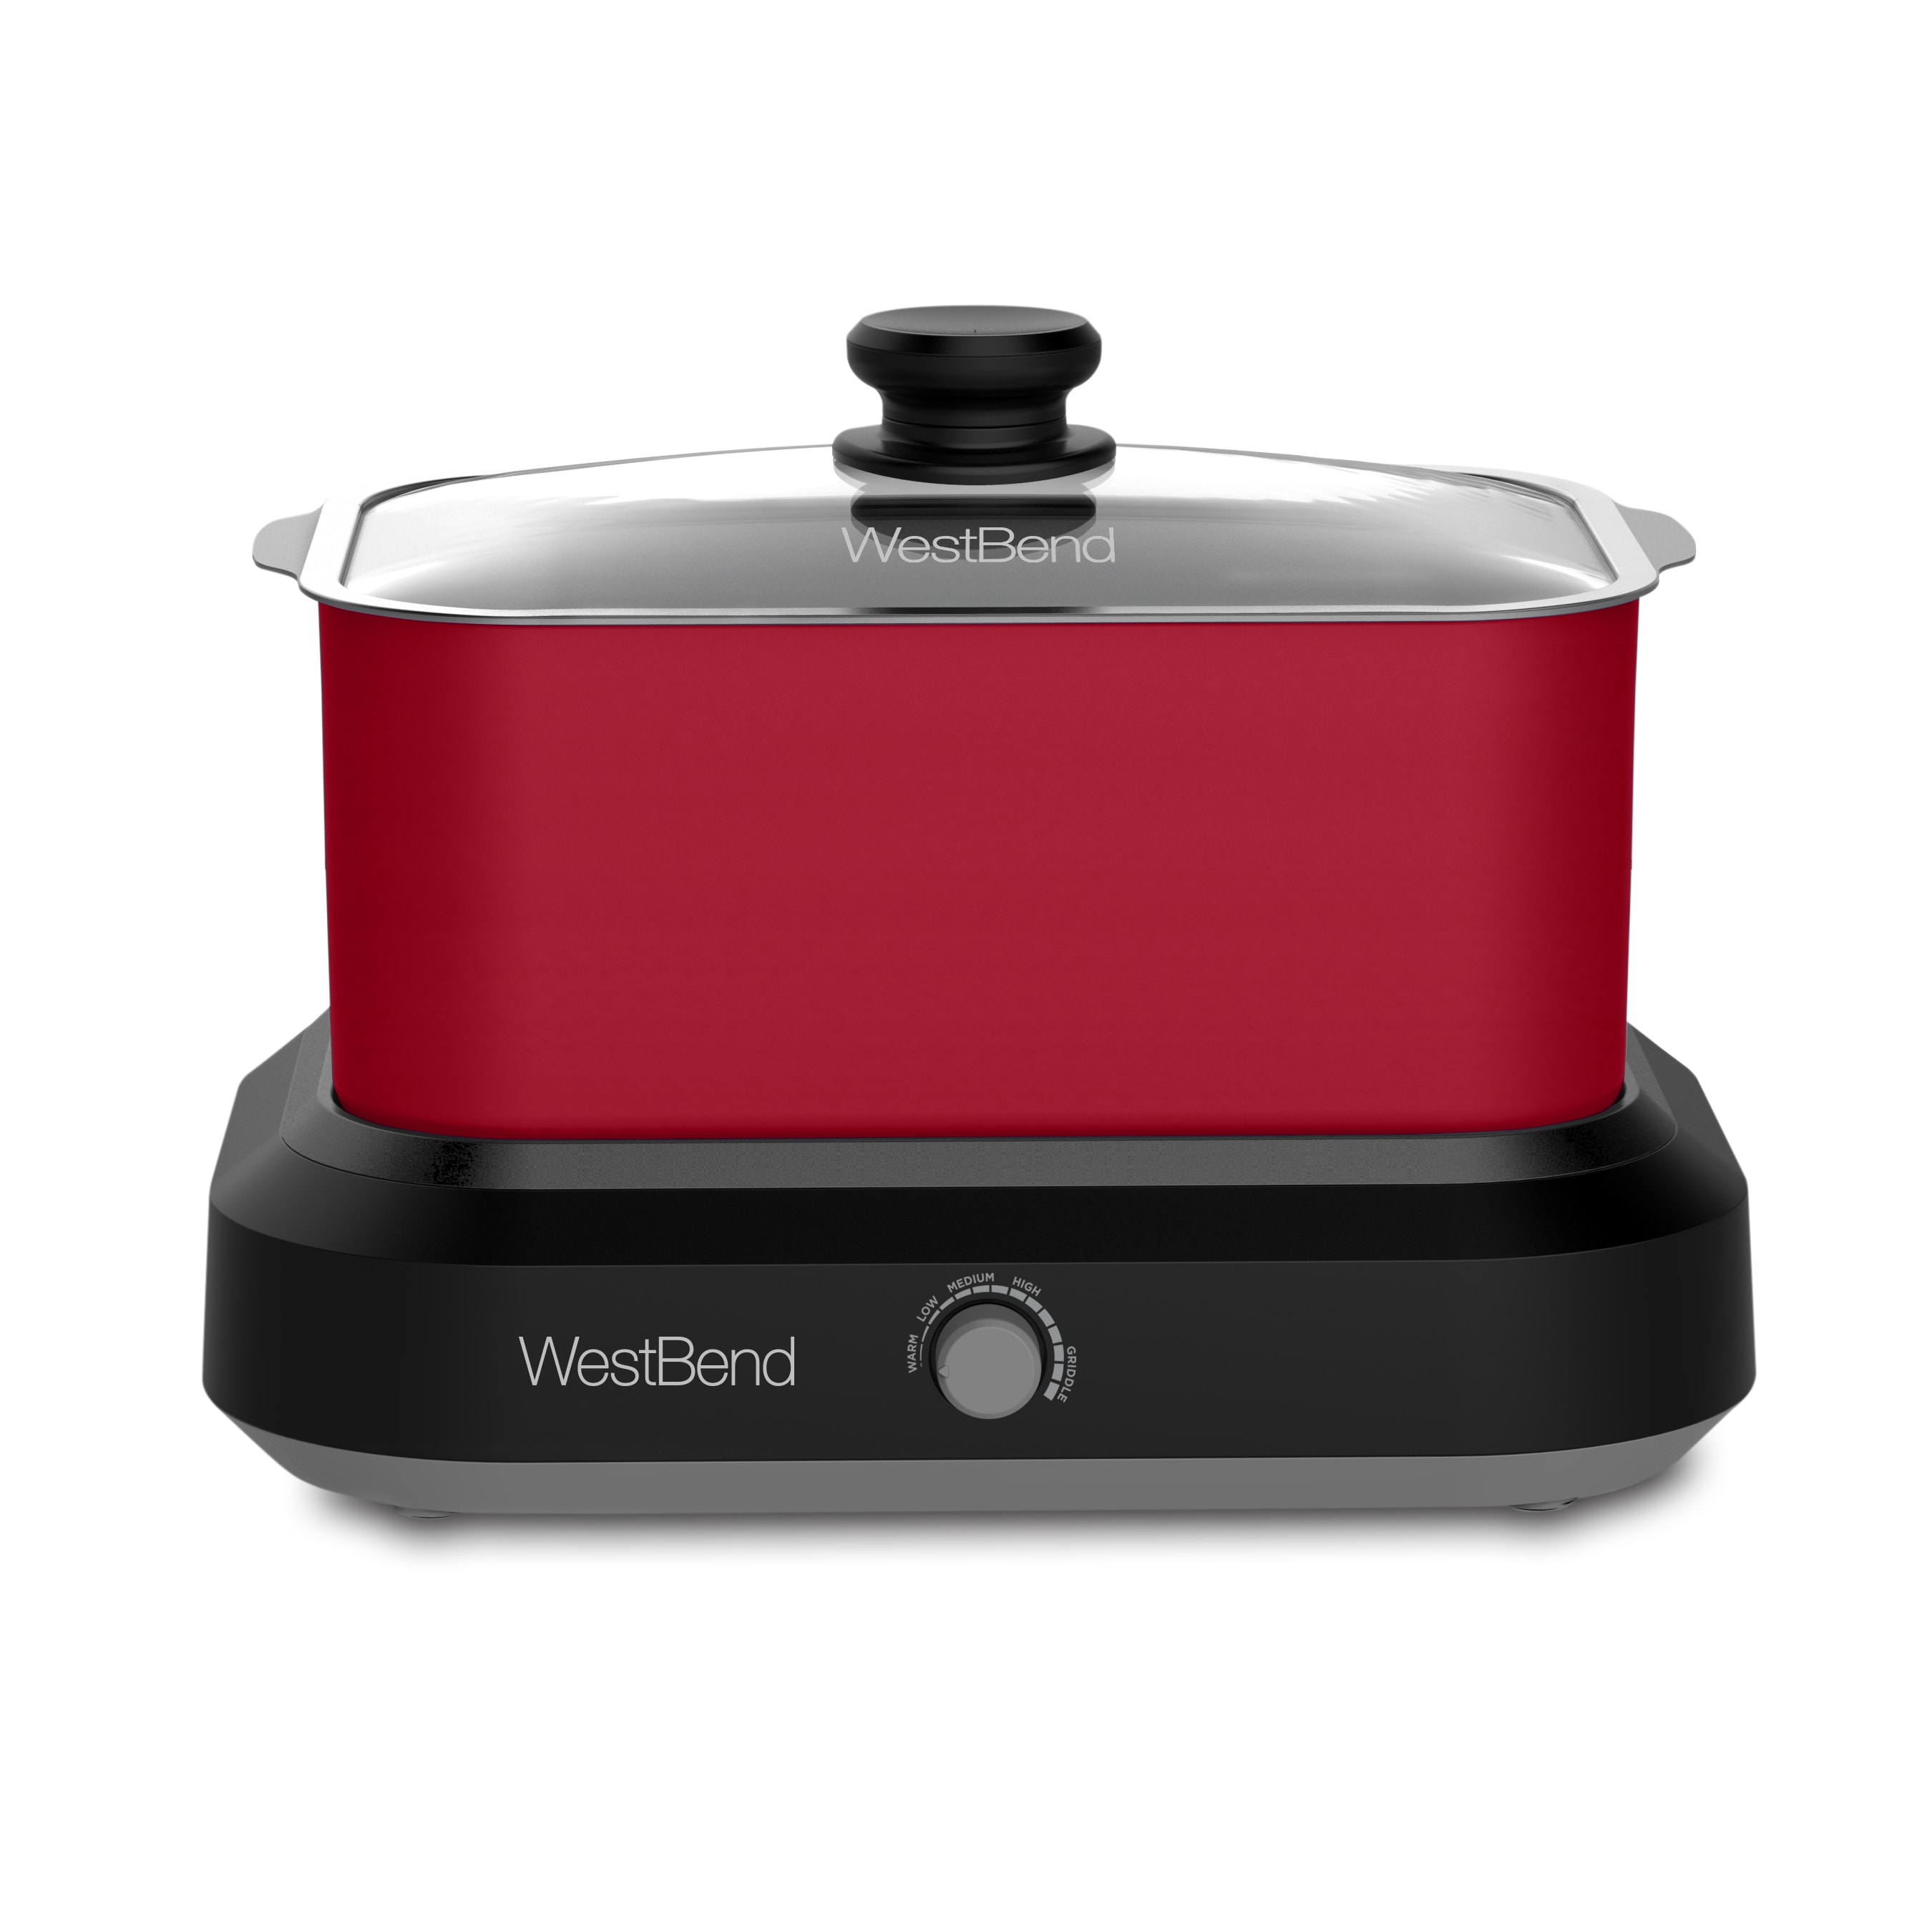 Courant 3.2 Quart Red Slow Cooker with Removabl e Ceramic Pot